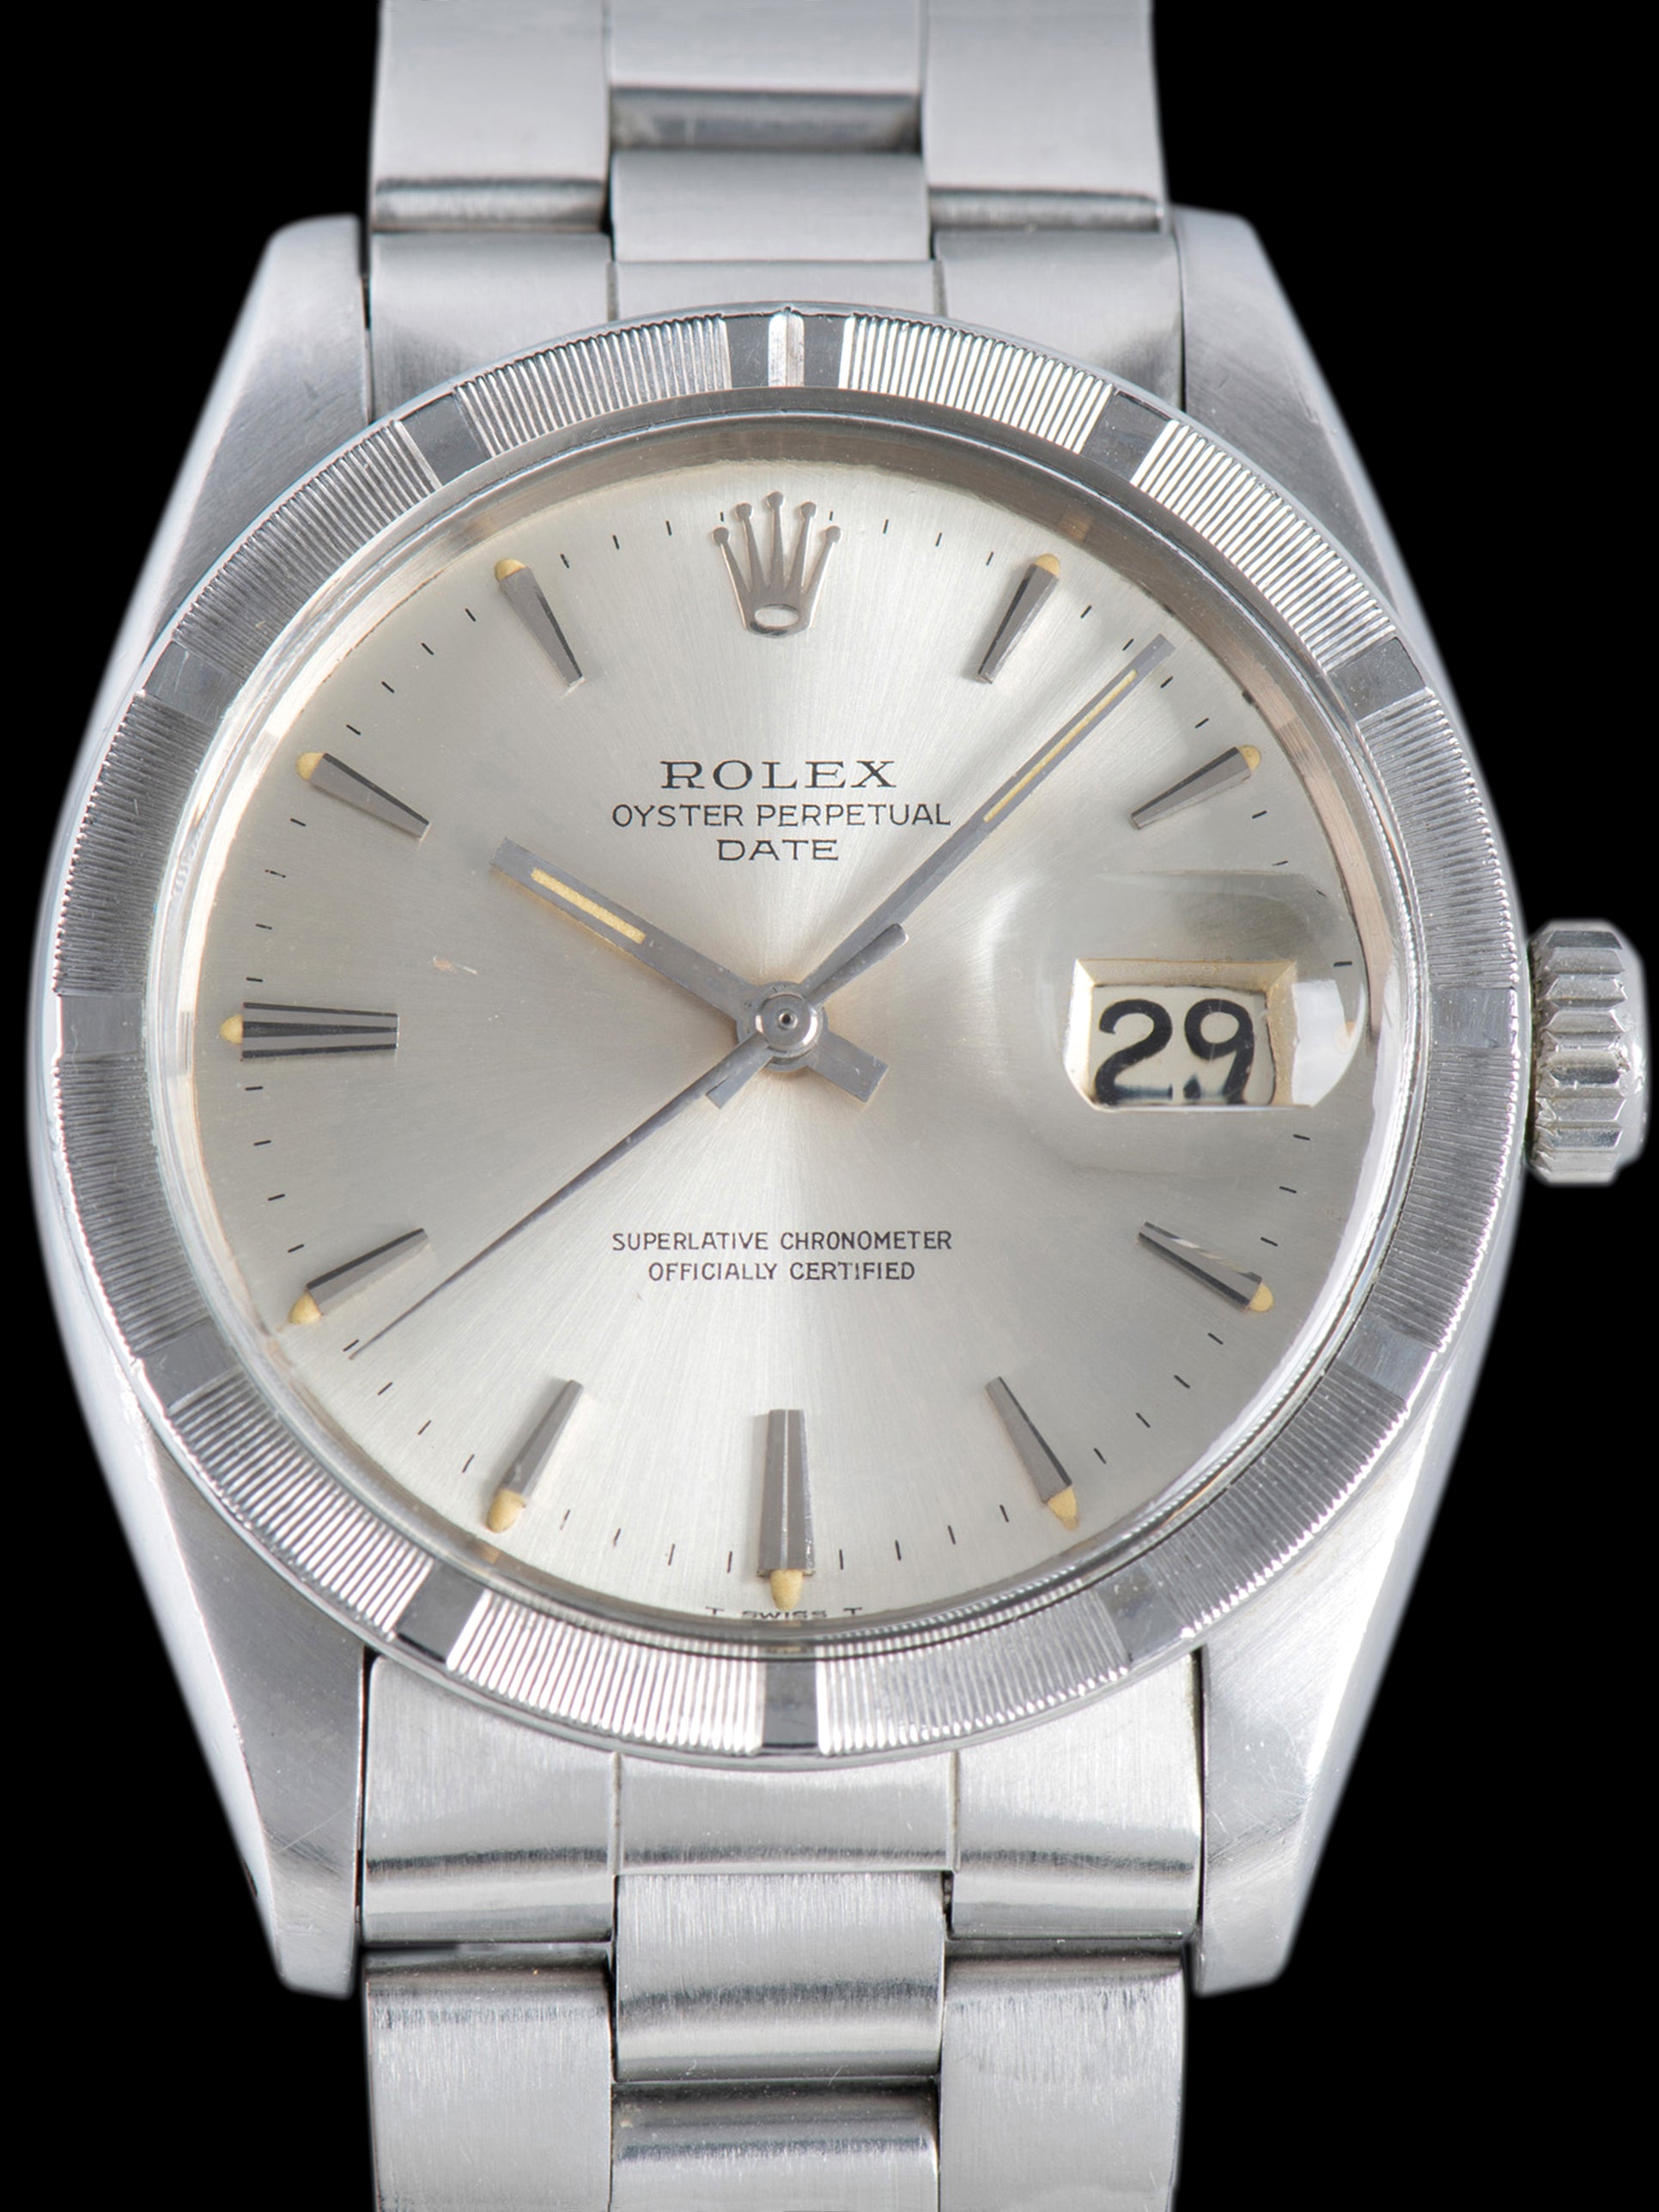 1965 Rolex Oyster Perpetual Date (Ref. 1501) Silver Dial W/ Box, Papers, & RSC Papers